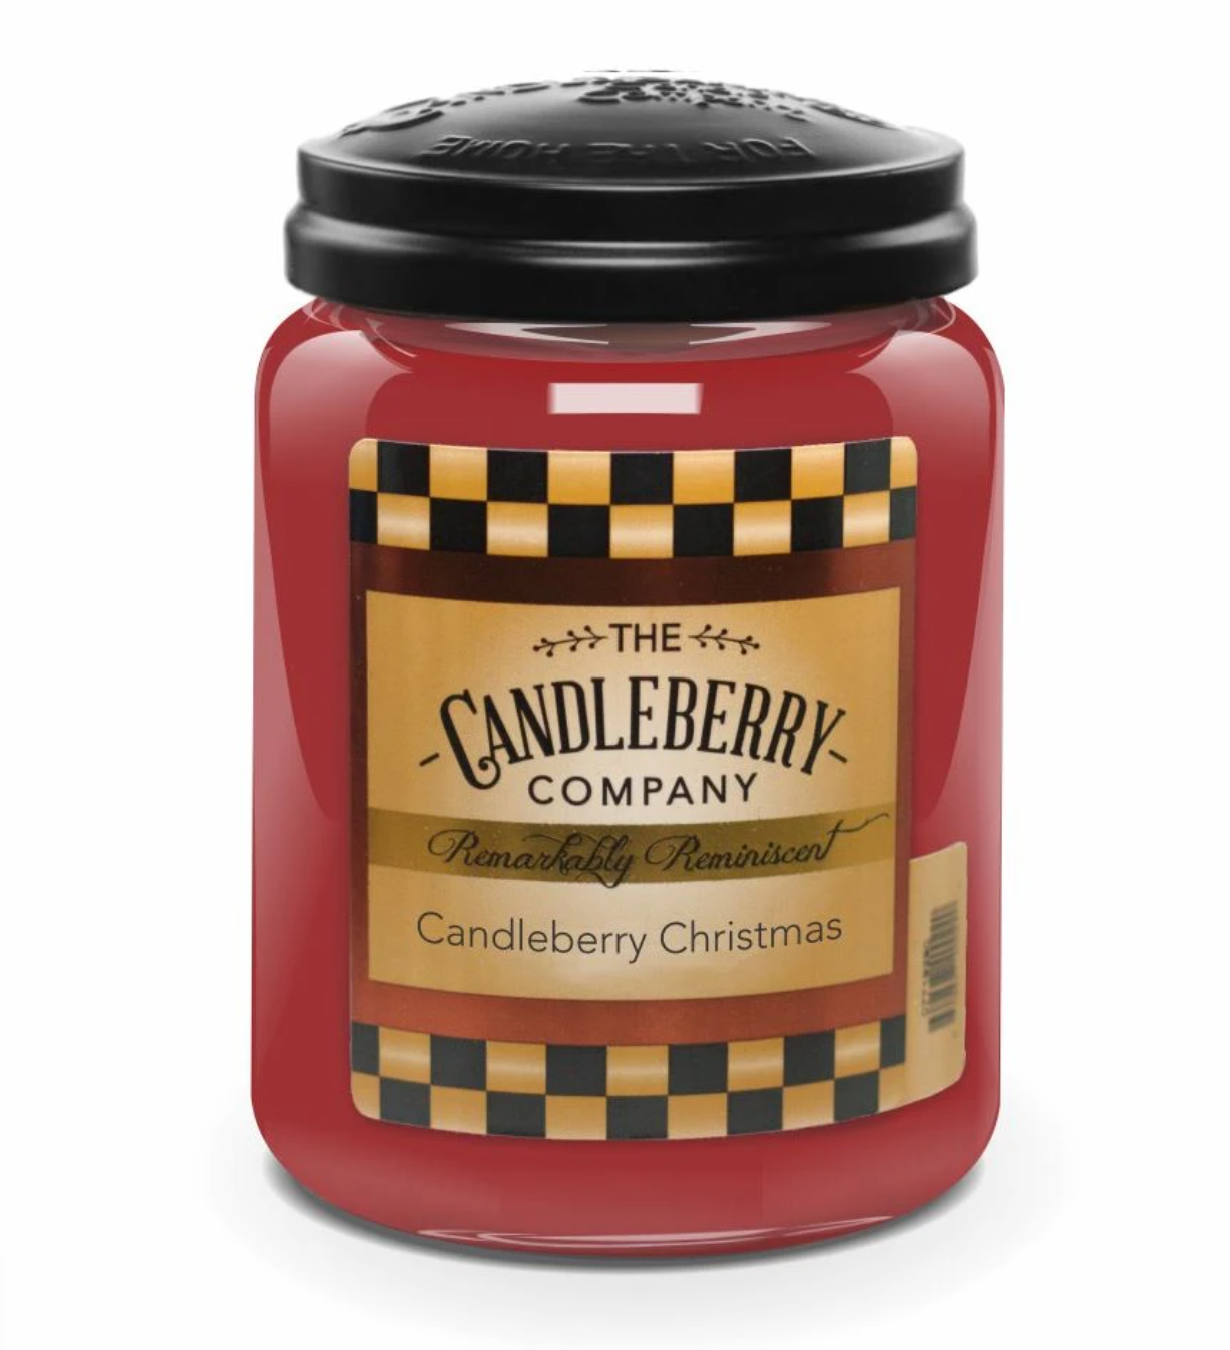 Candleberry Company Scented Candles - 26oz.